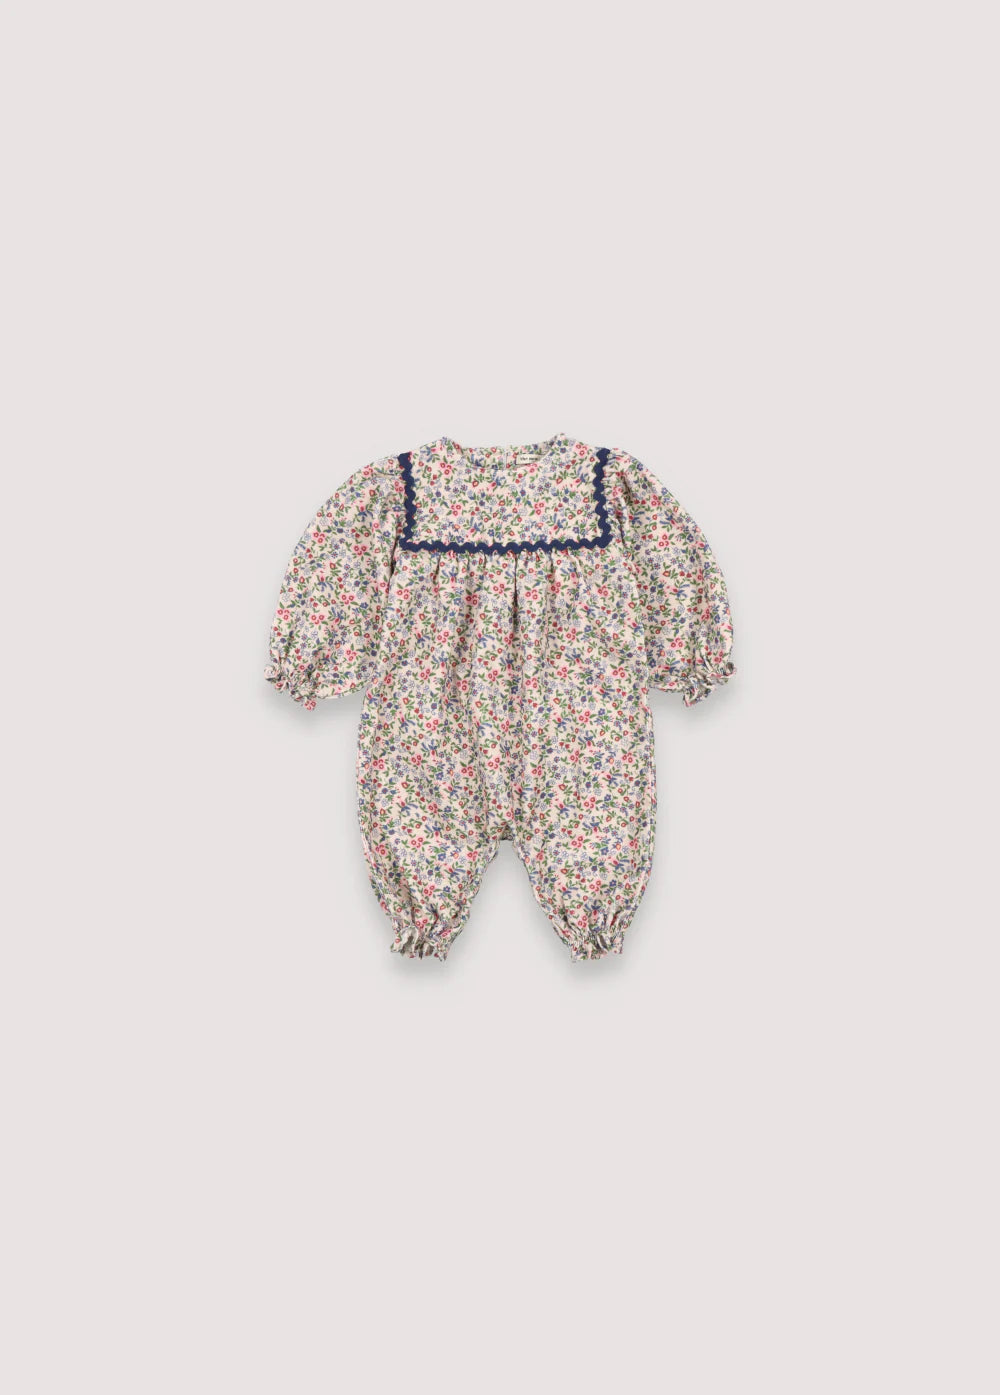 THE NEW SOCIETY SERAPHINA BABY JUMPSUIT